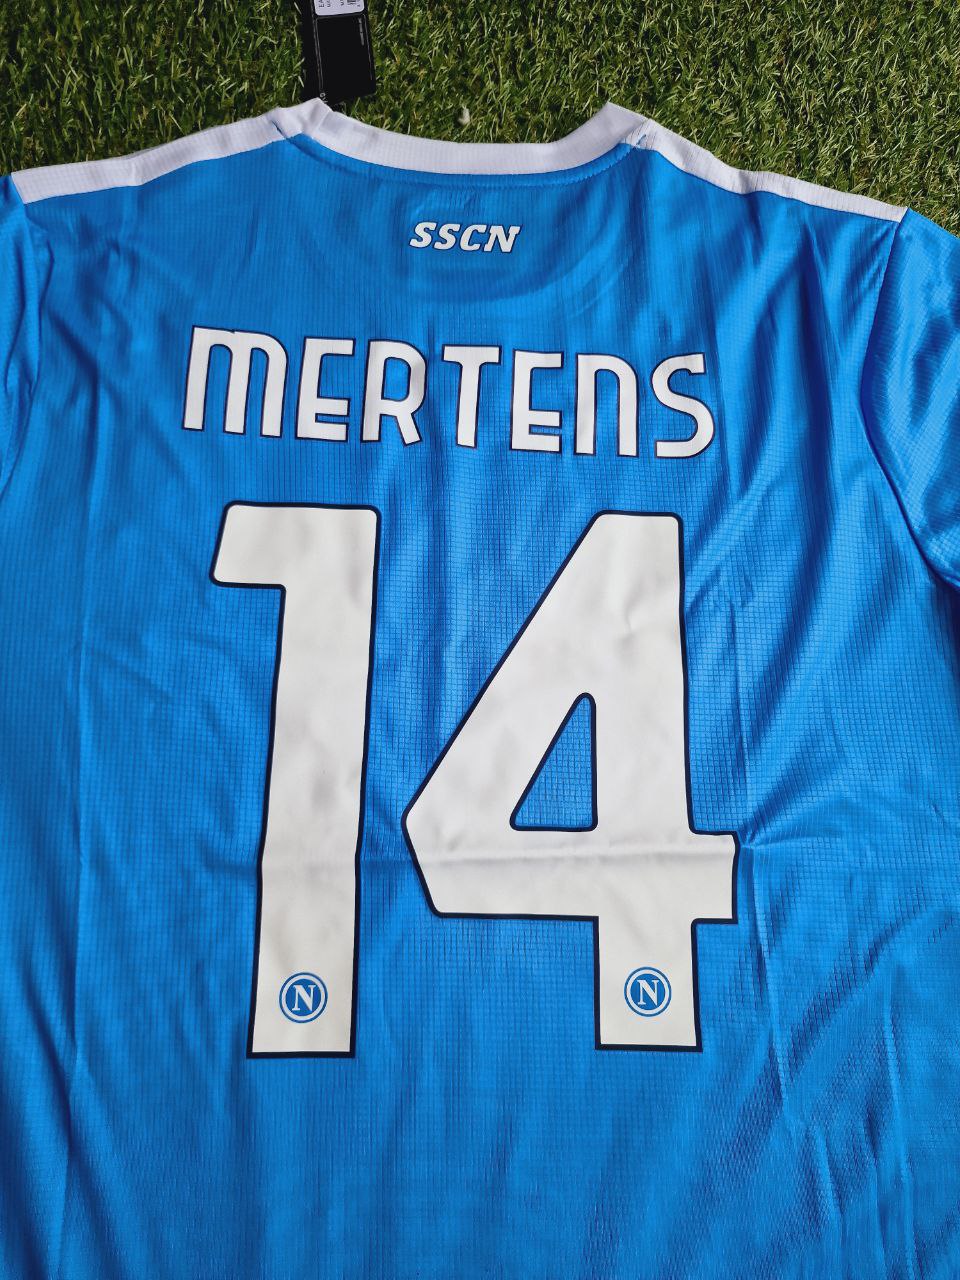 Dries Mertens Napoli Blue Special Edition Jersey